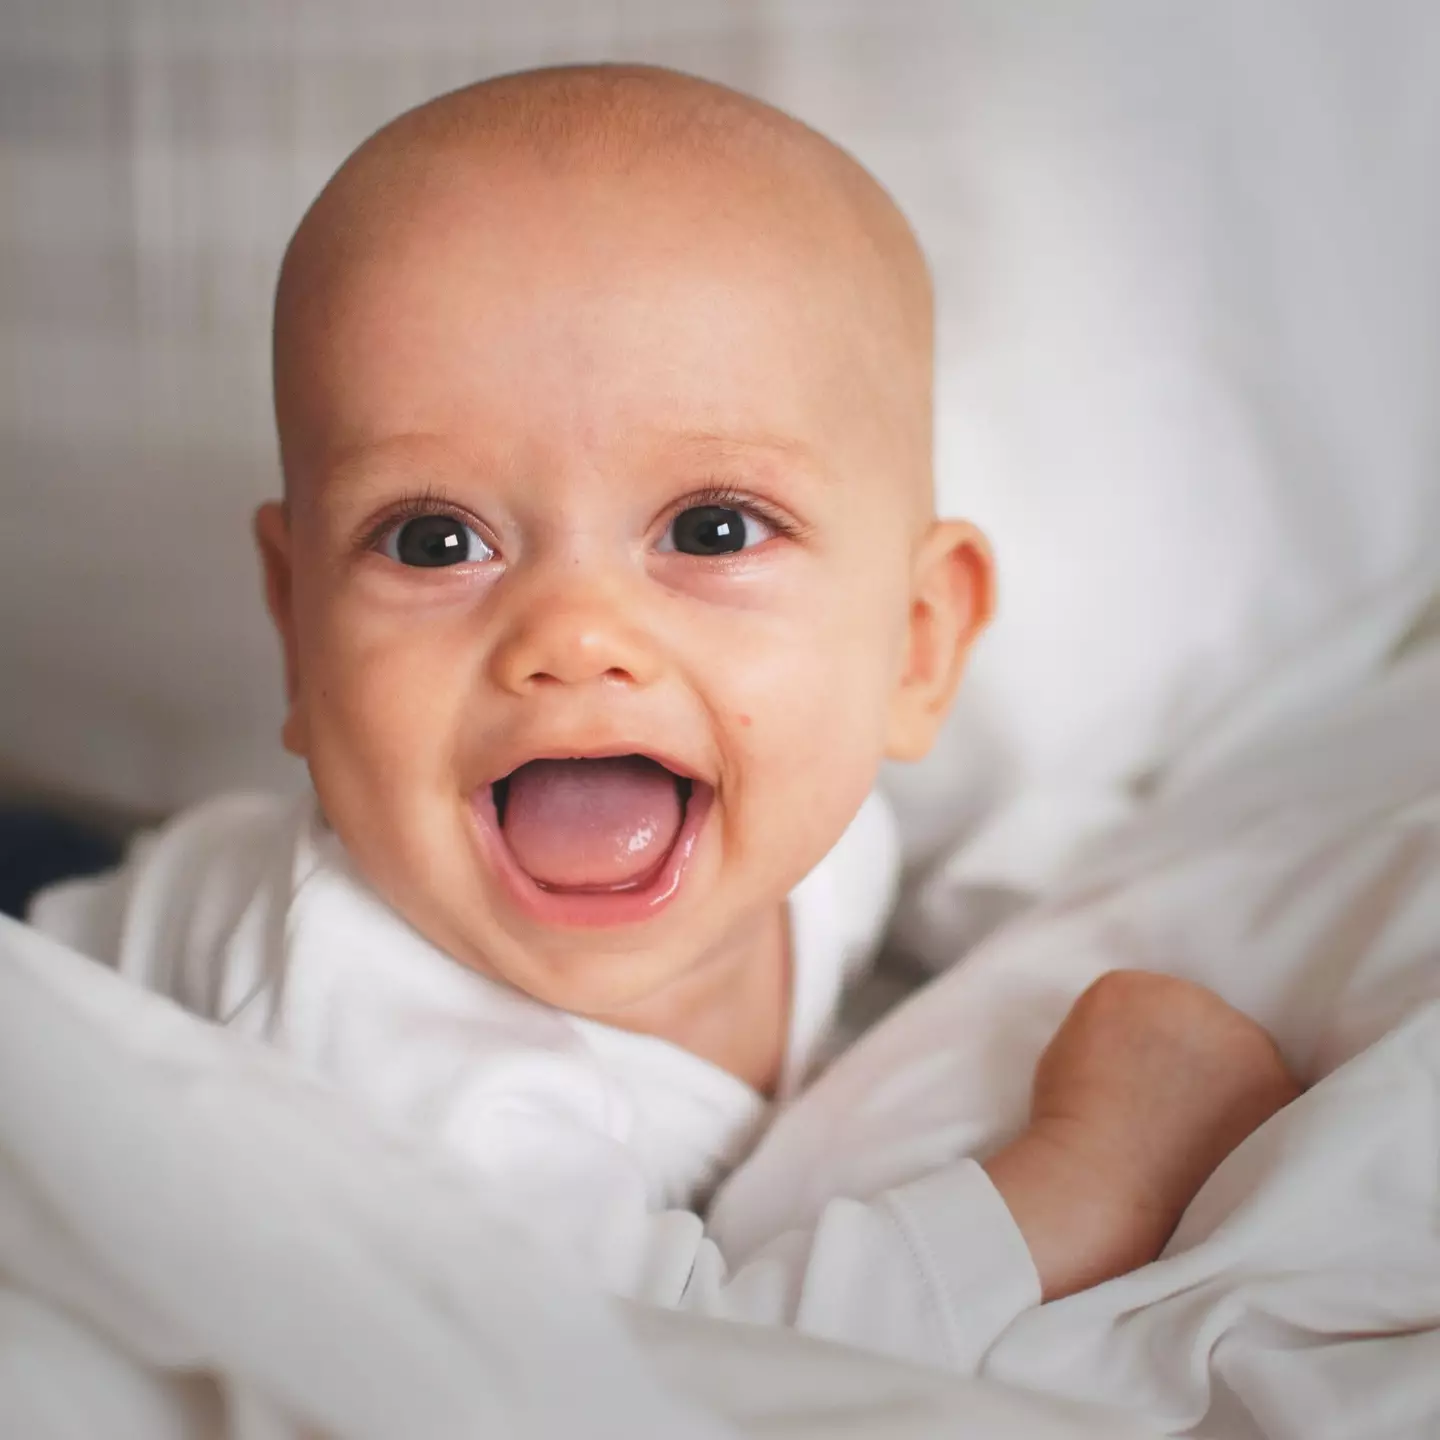 One website listed the 'worst' baby names (